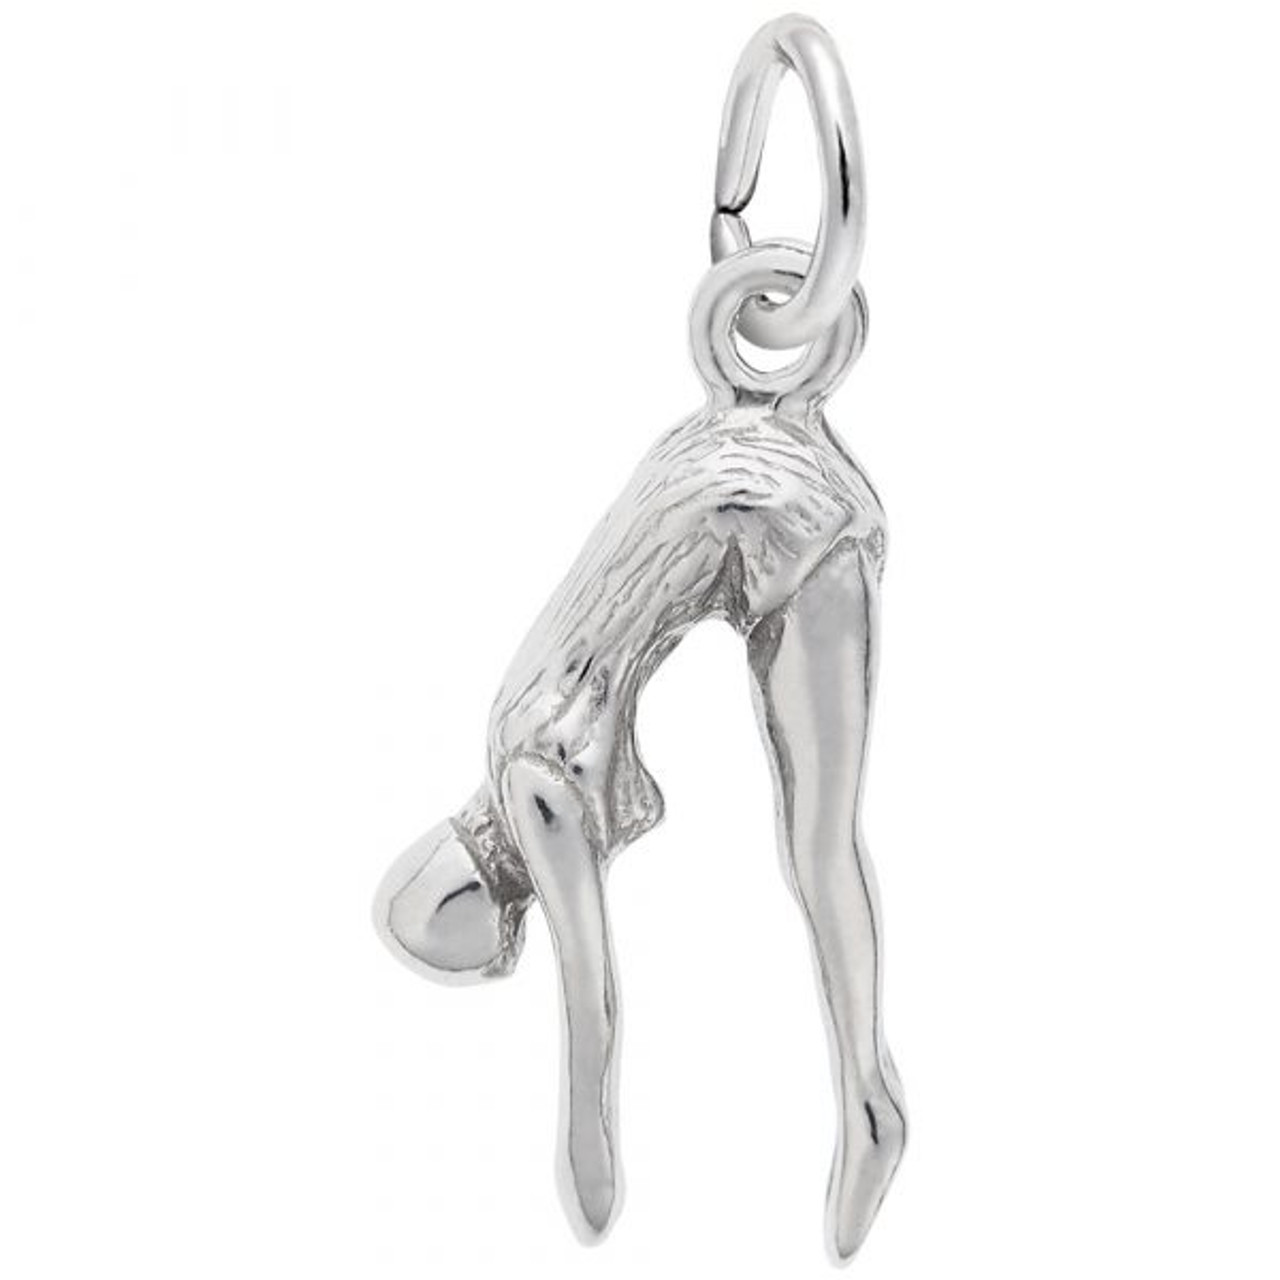 Diver Silver Charm - Sterling Silver and 14k White Gold